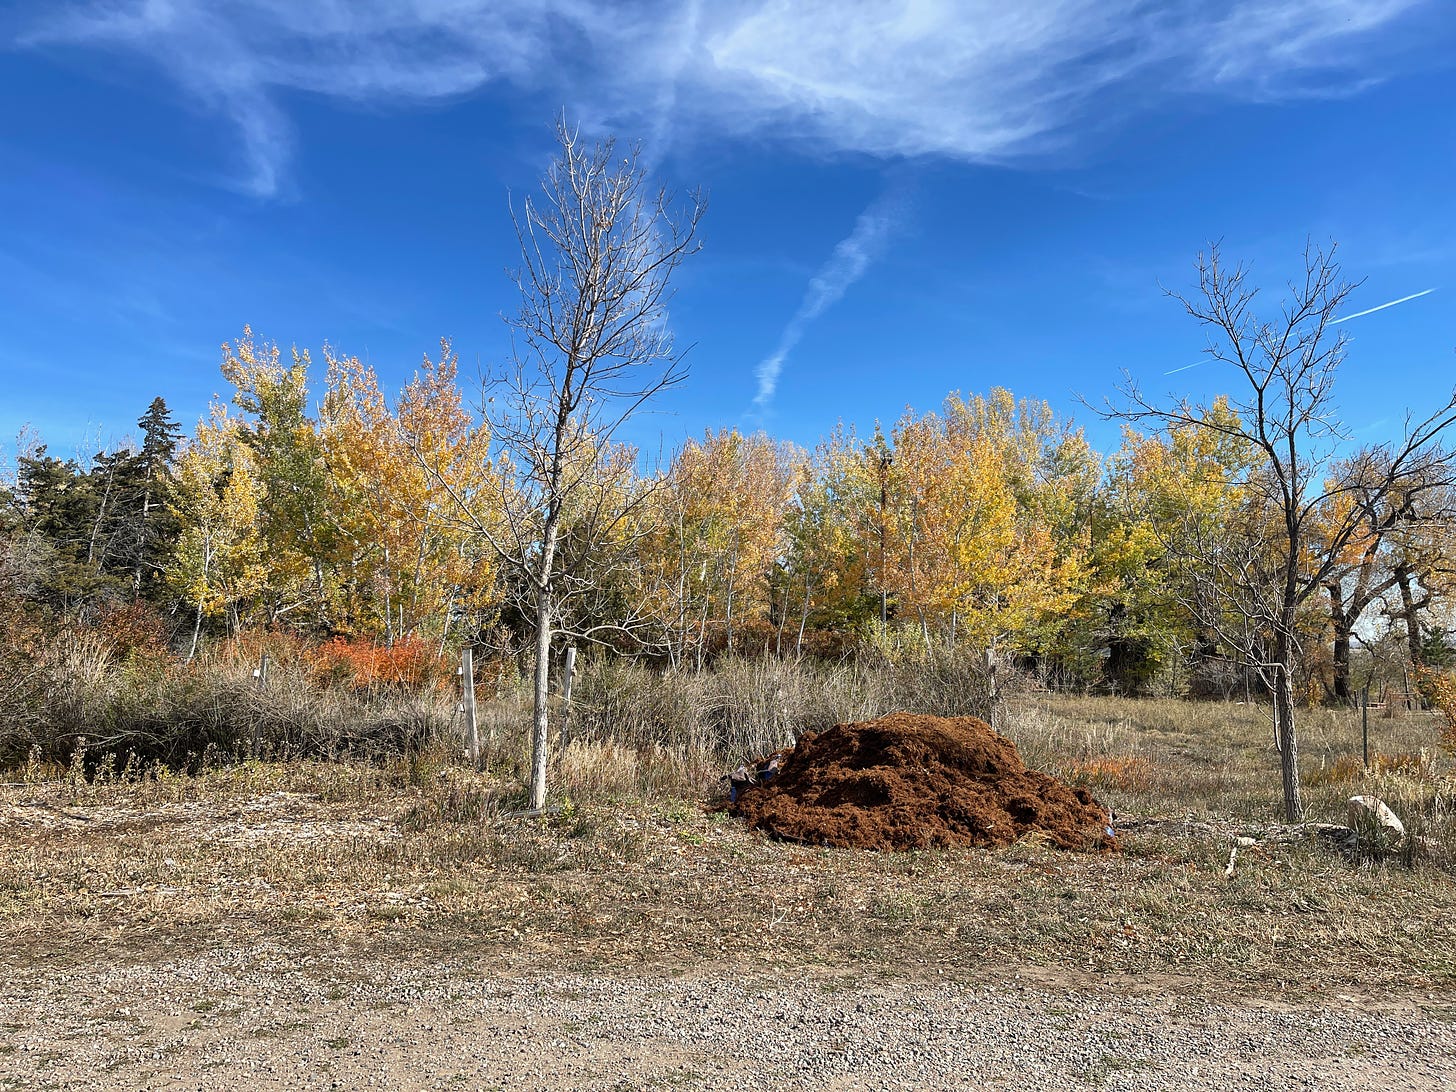 Next to an herb garden, trees stand tall - some green, some yellow, some orange, some without leaves, some evergreen. A pile of mulch sits between two trees who have shed their leaves in late autumn. The sky is bright blue with wispy clouds and jet trails.